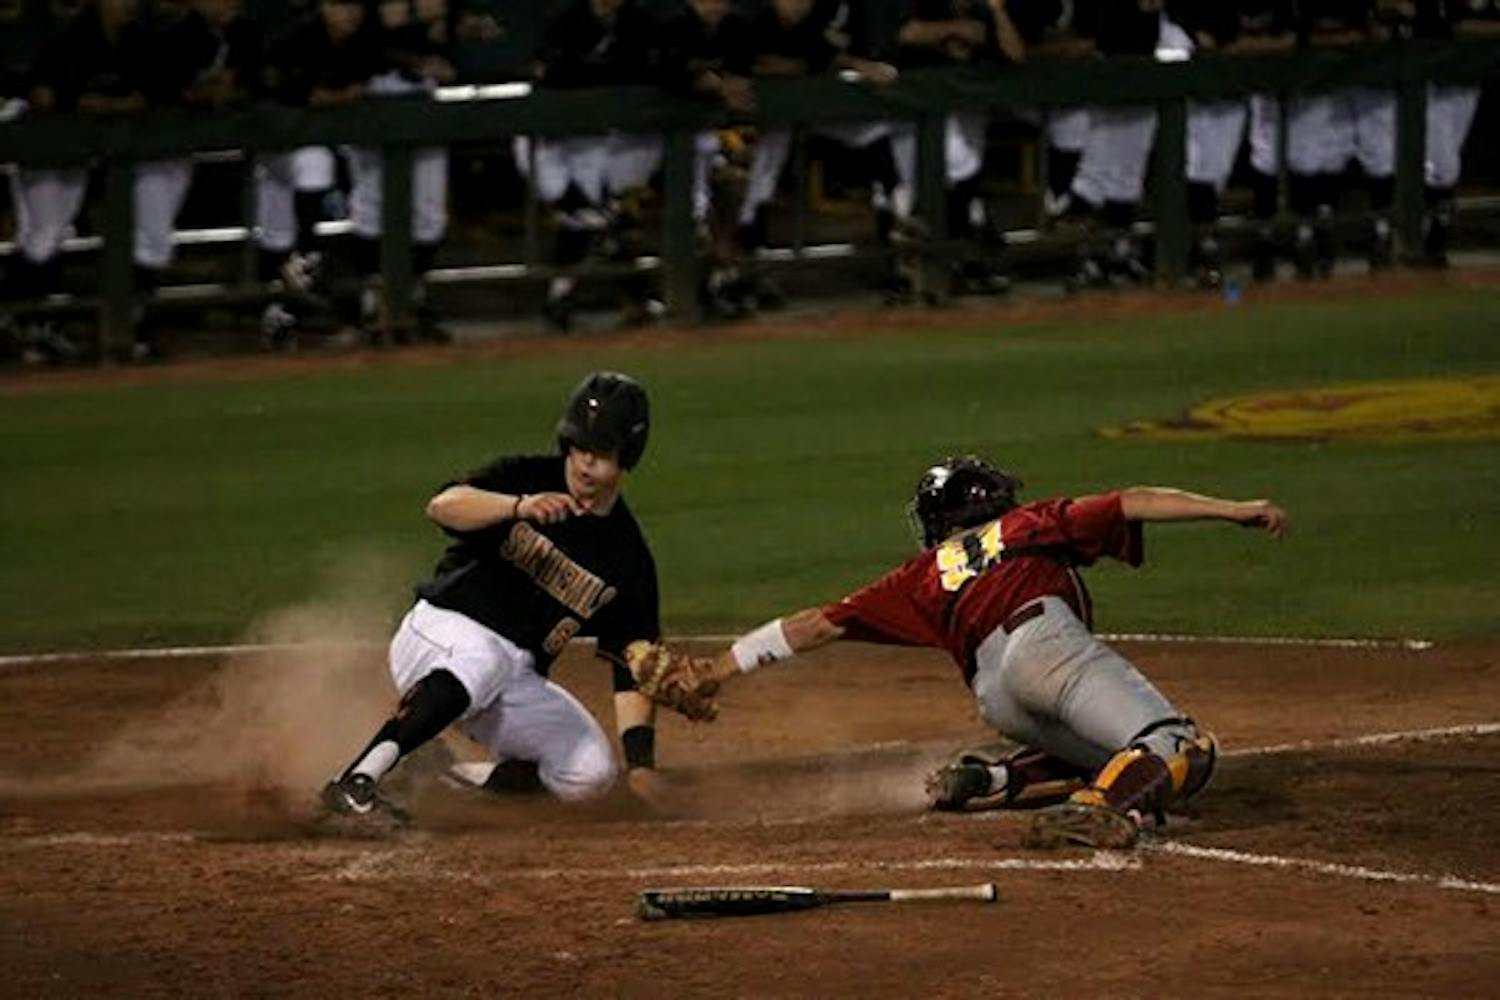 Super performance: ASU sophomore Joey DeMichele rounds third base after hitting a two-run home run during the Sun Devil’s 13-4 dismantling of Arkansas on Sunday. ASU is now headed to the Super Regionals. (Photo by Aaron Lavinsky)